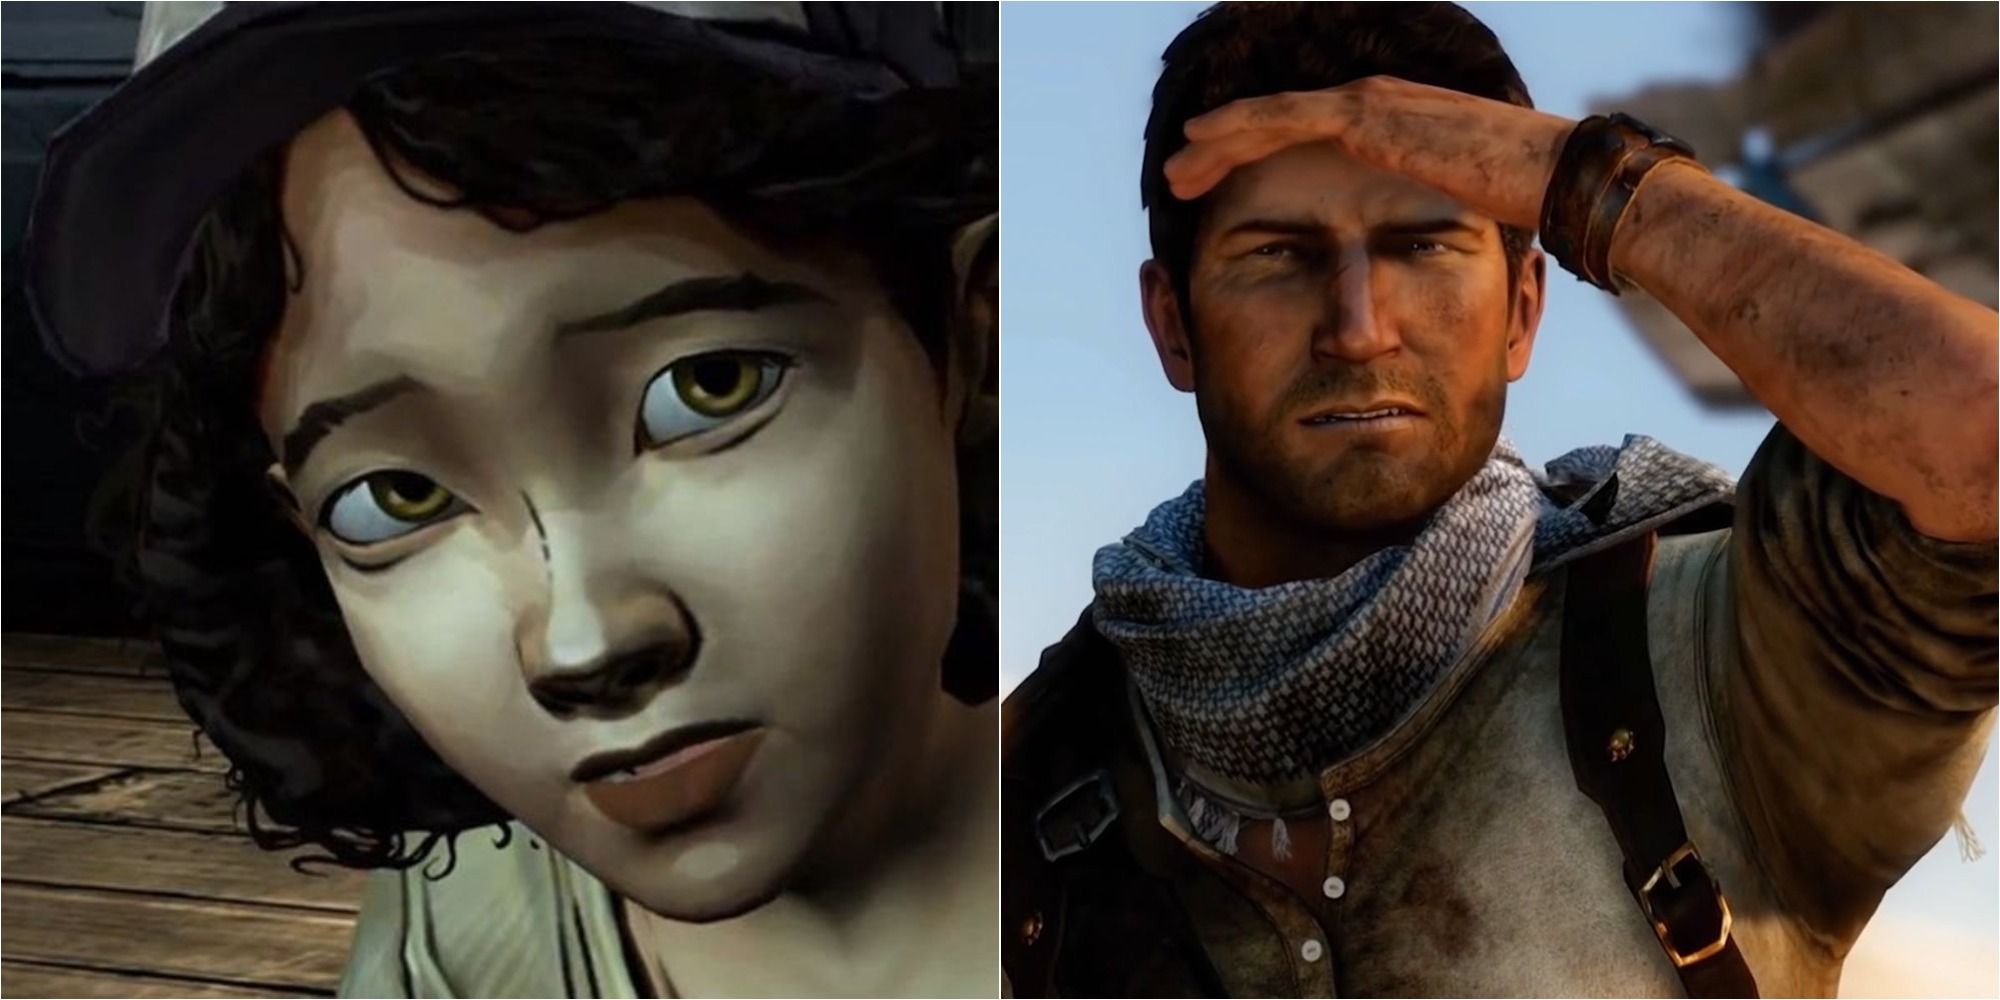 Games Series With No Bad Entries Featured Split Image Clementine and Nathan Drake